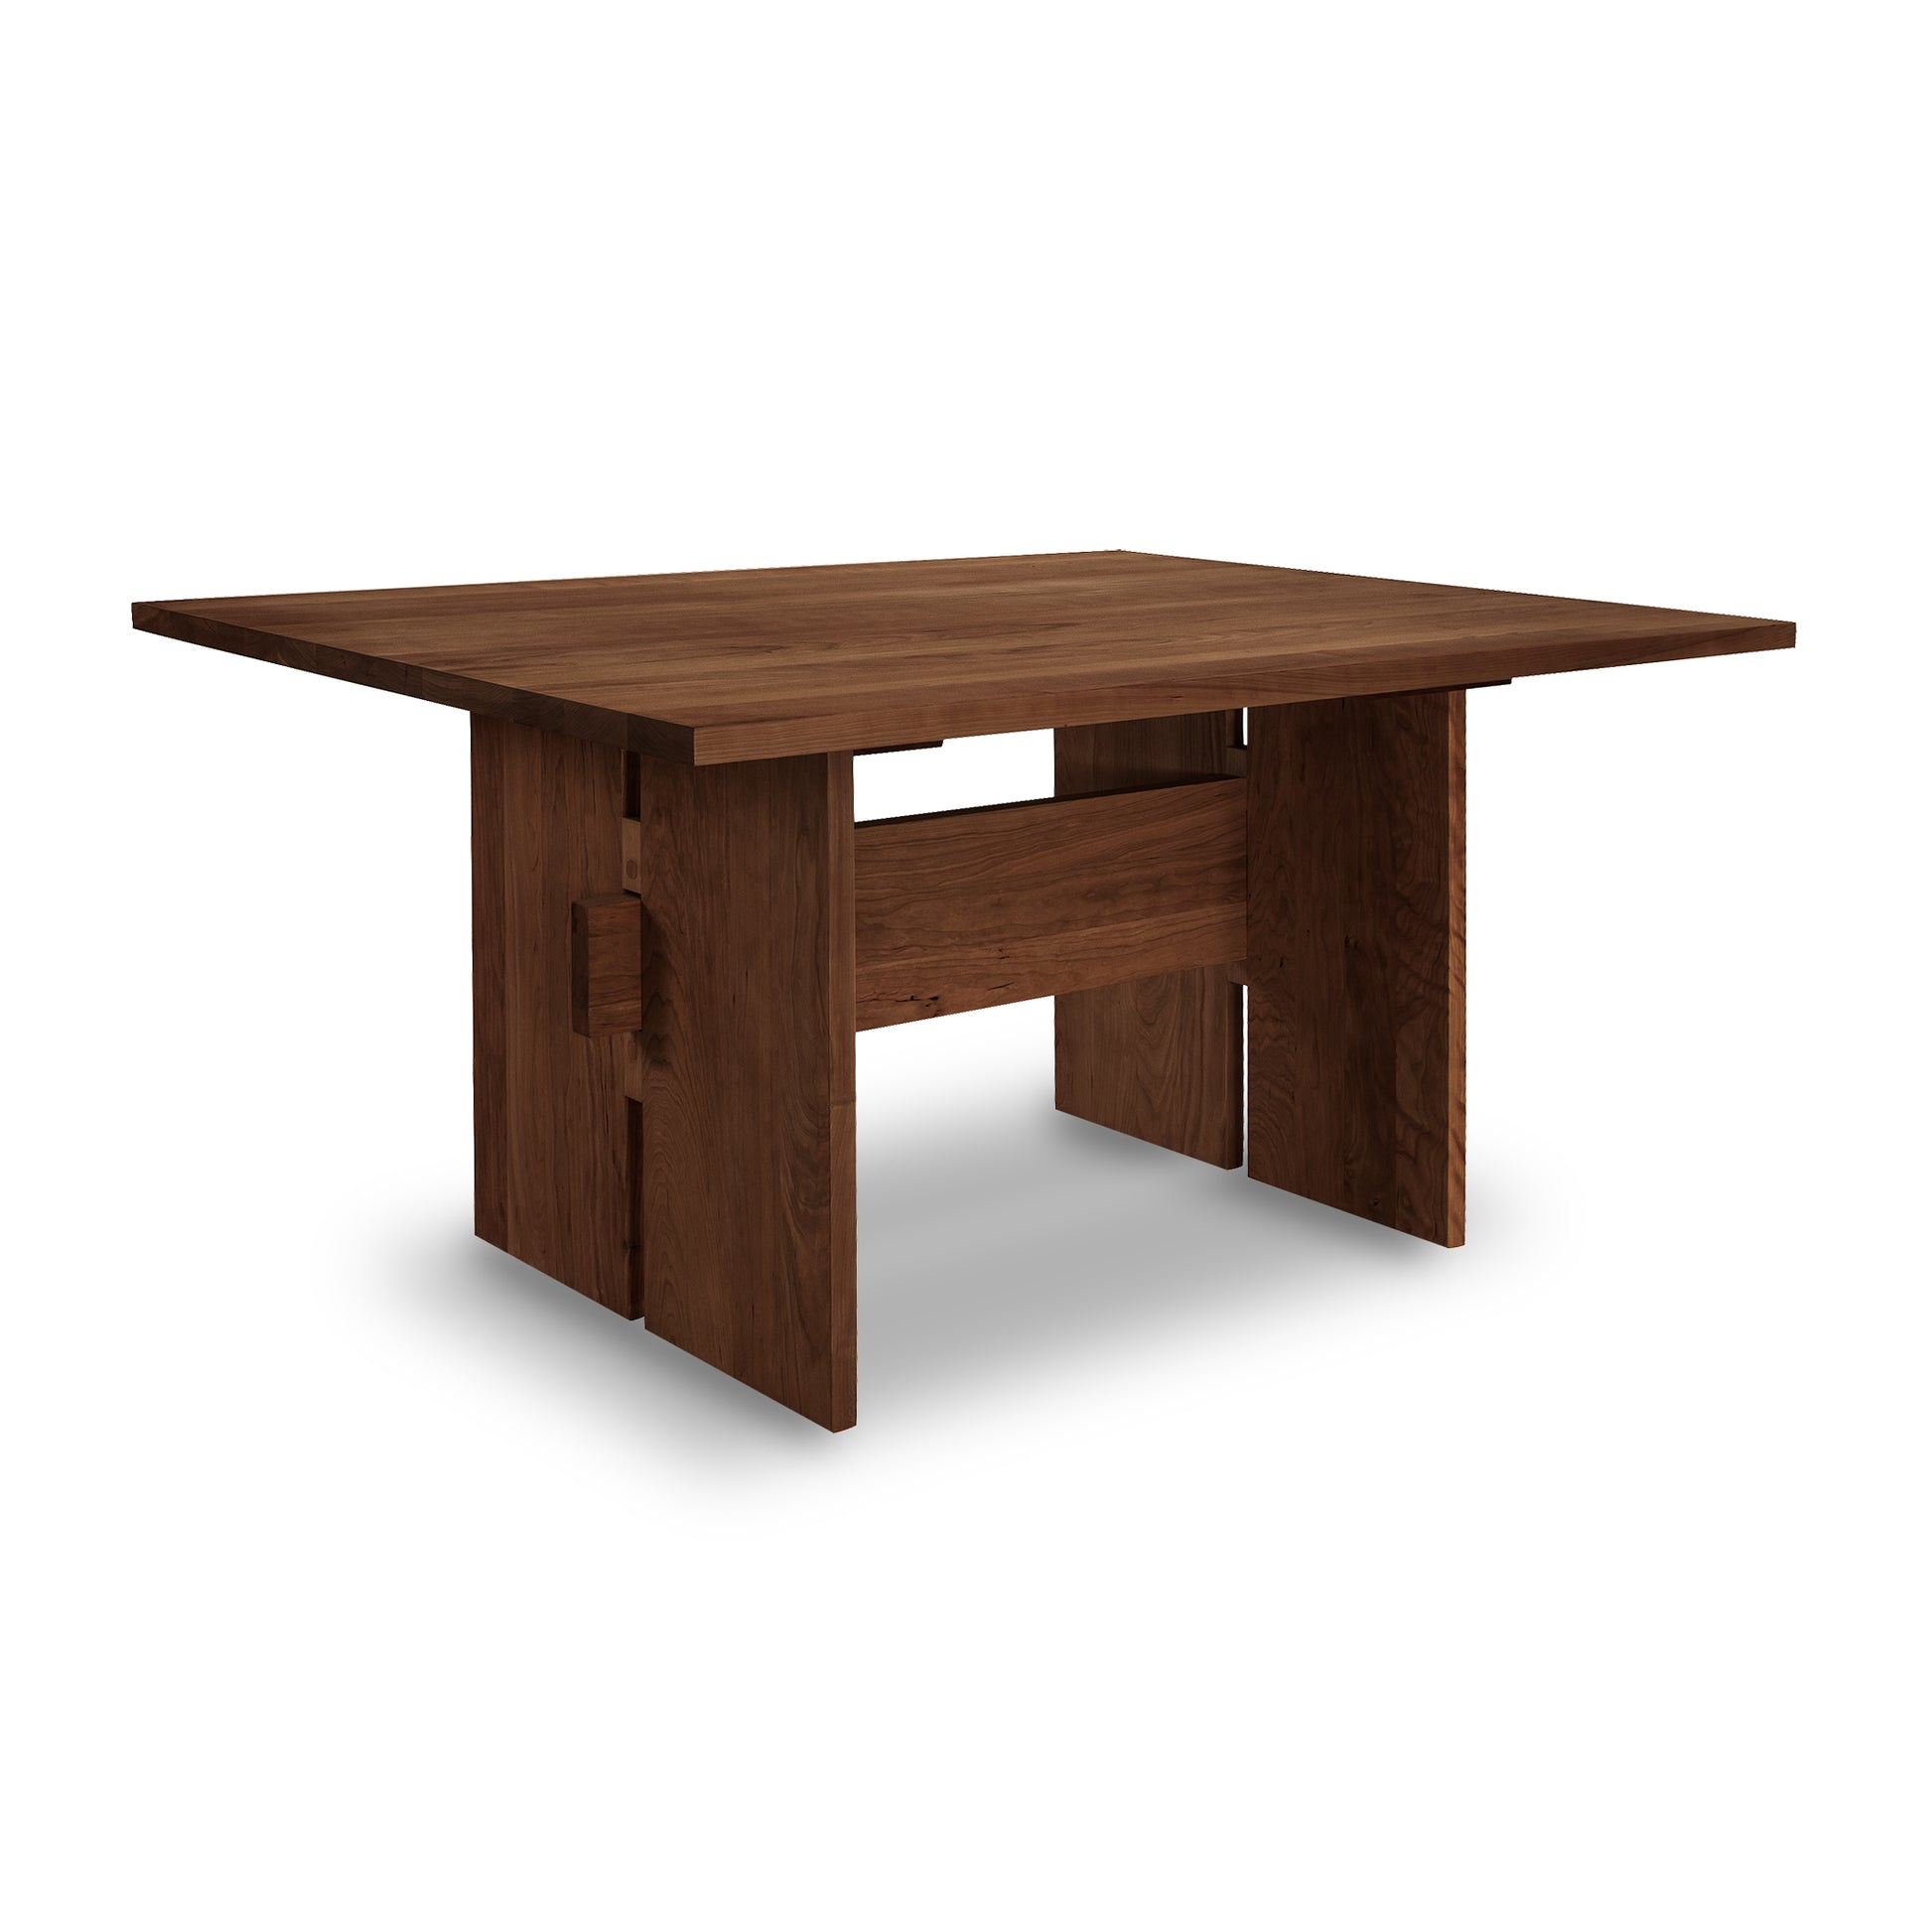 A Modern American Dining Table by Vermont Furniture Designs featuring high-quality solid wood construction with an eco-friendly oil finish.